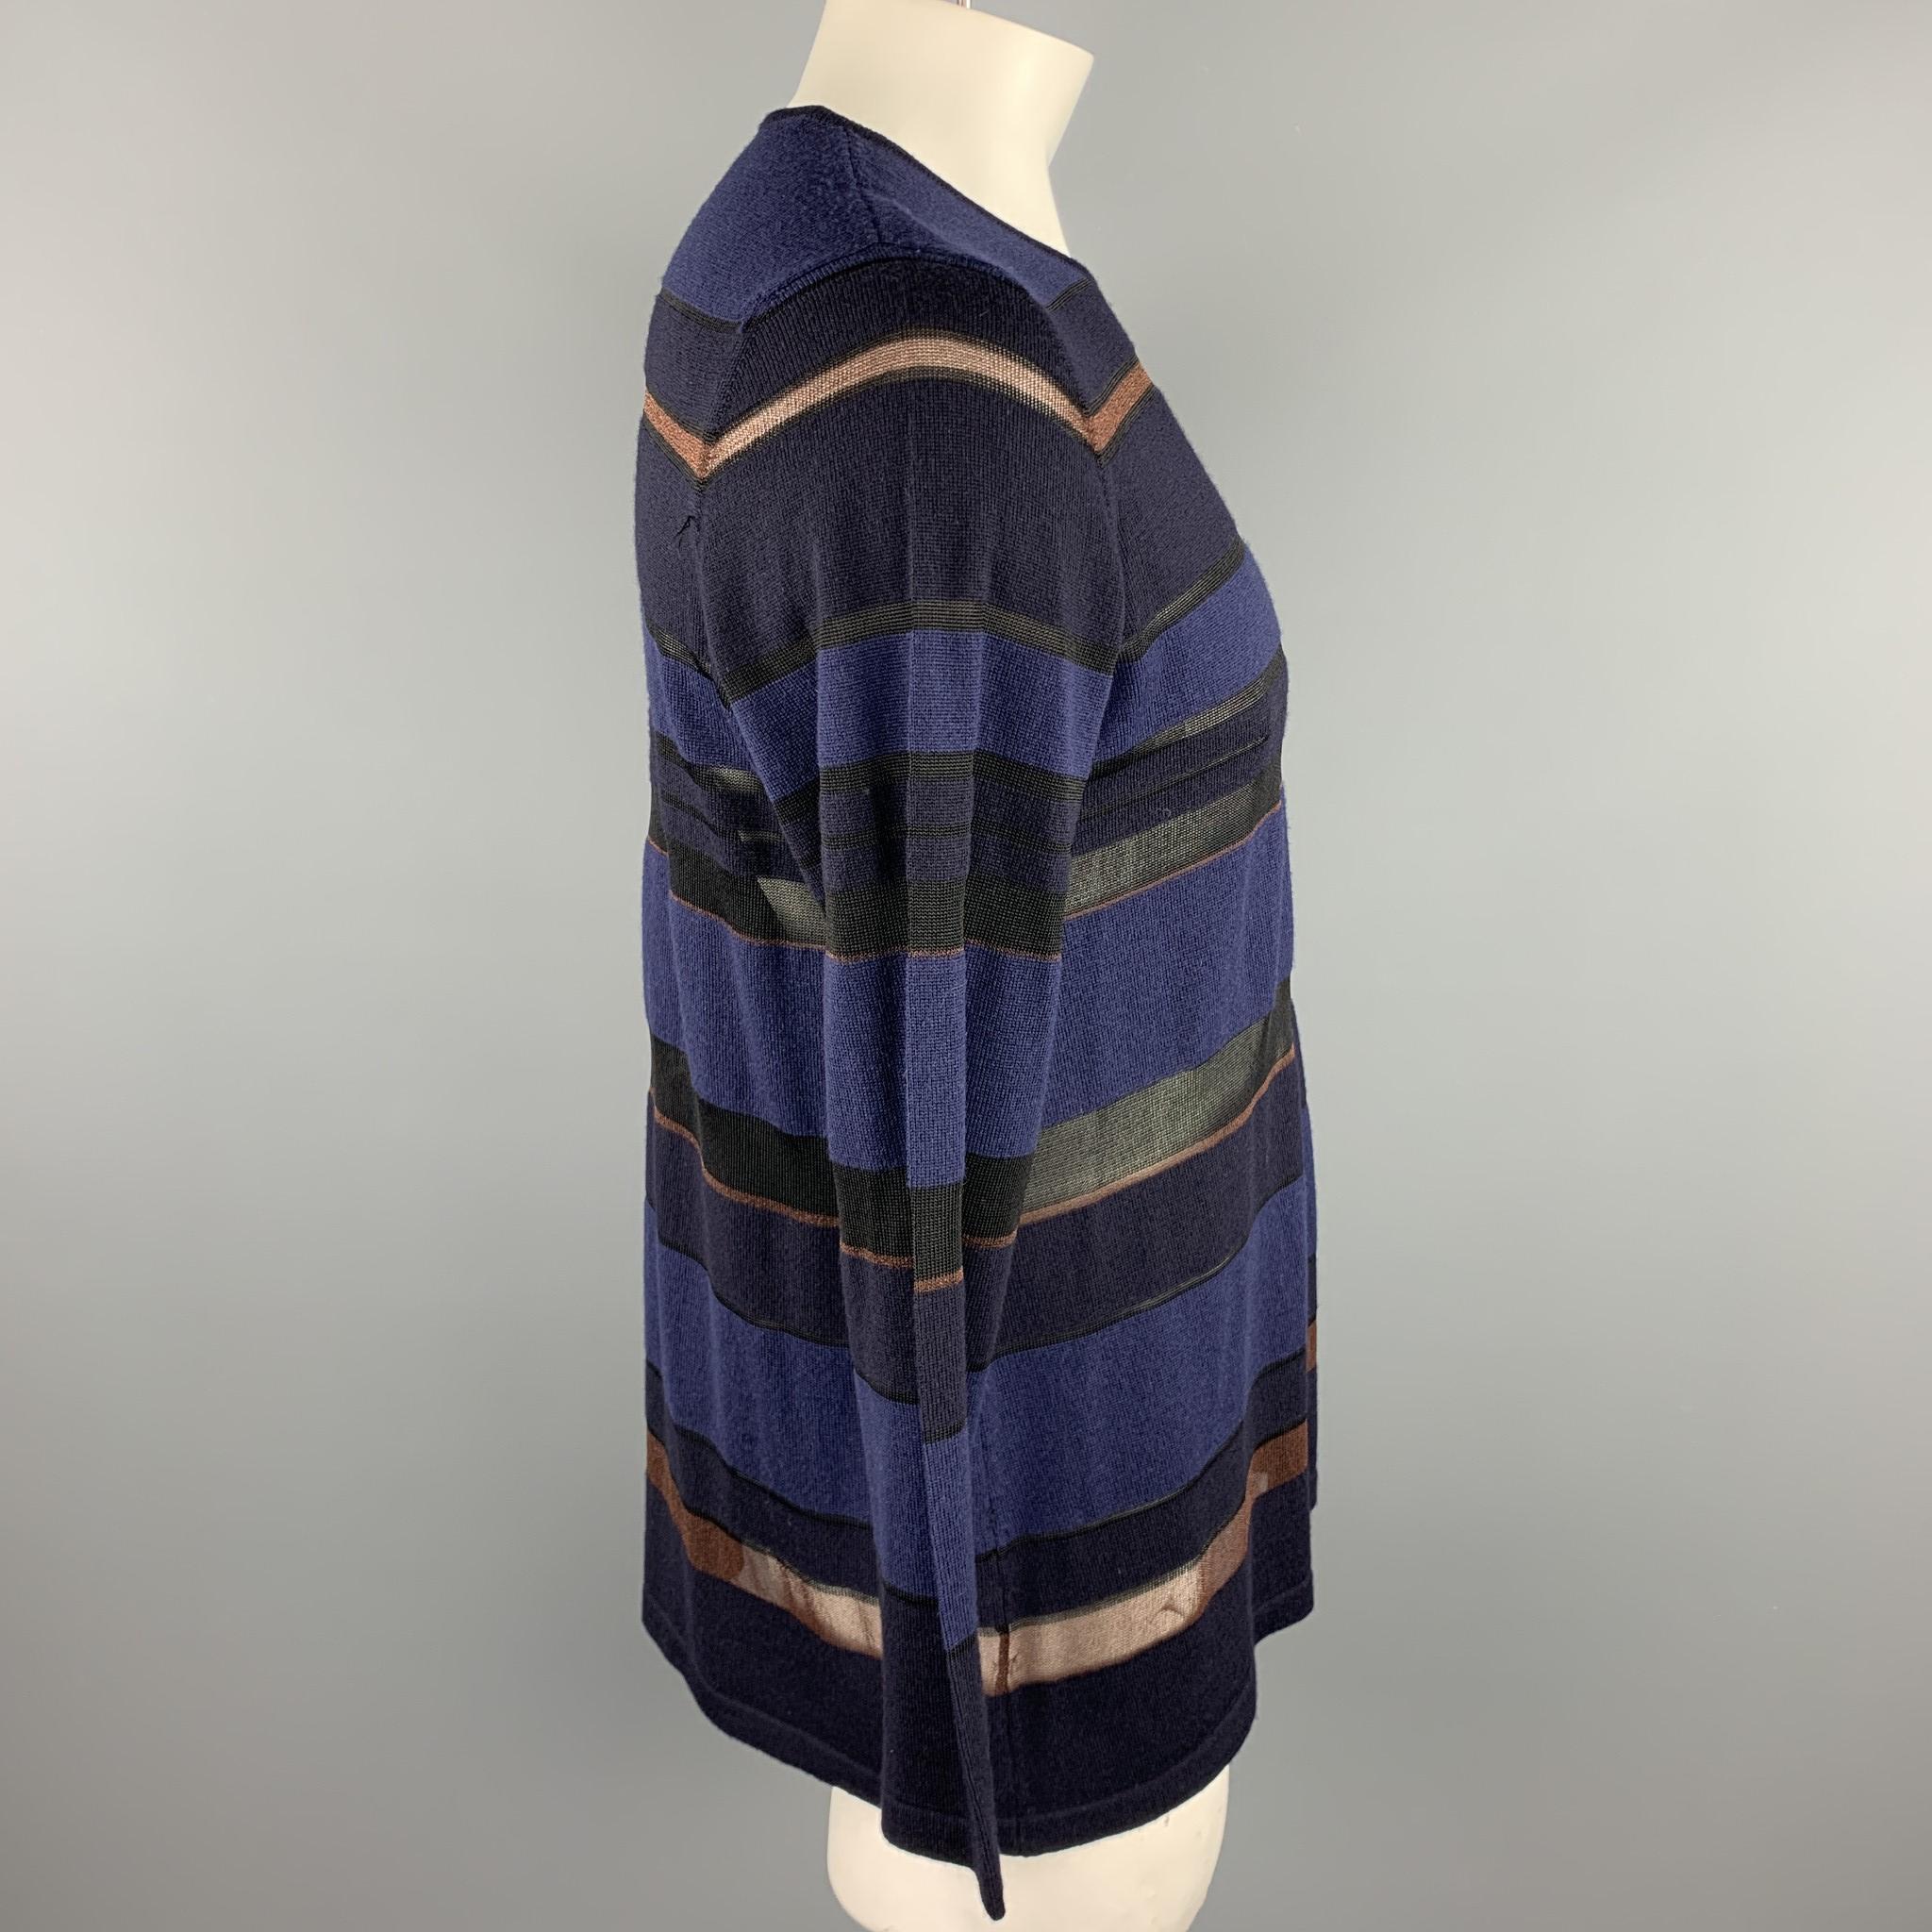 JAEGER pullover navy & black stripe wool blend featuring a crew-neck.

Excellent Pre-Owned Condition.
Marked: L

Measurements:

Shoulder: 17.5 in. 
Chest: 44 in. 
Sleeve: 25.5 in. 
Length: 29 in. 